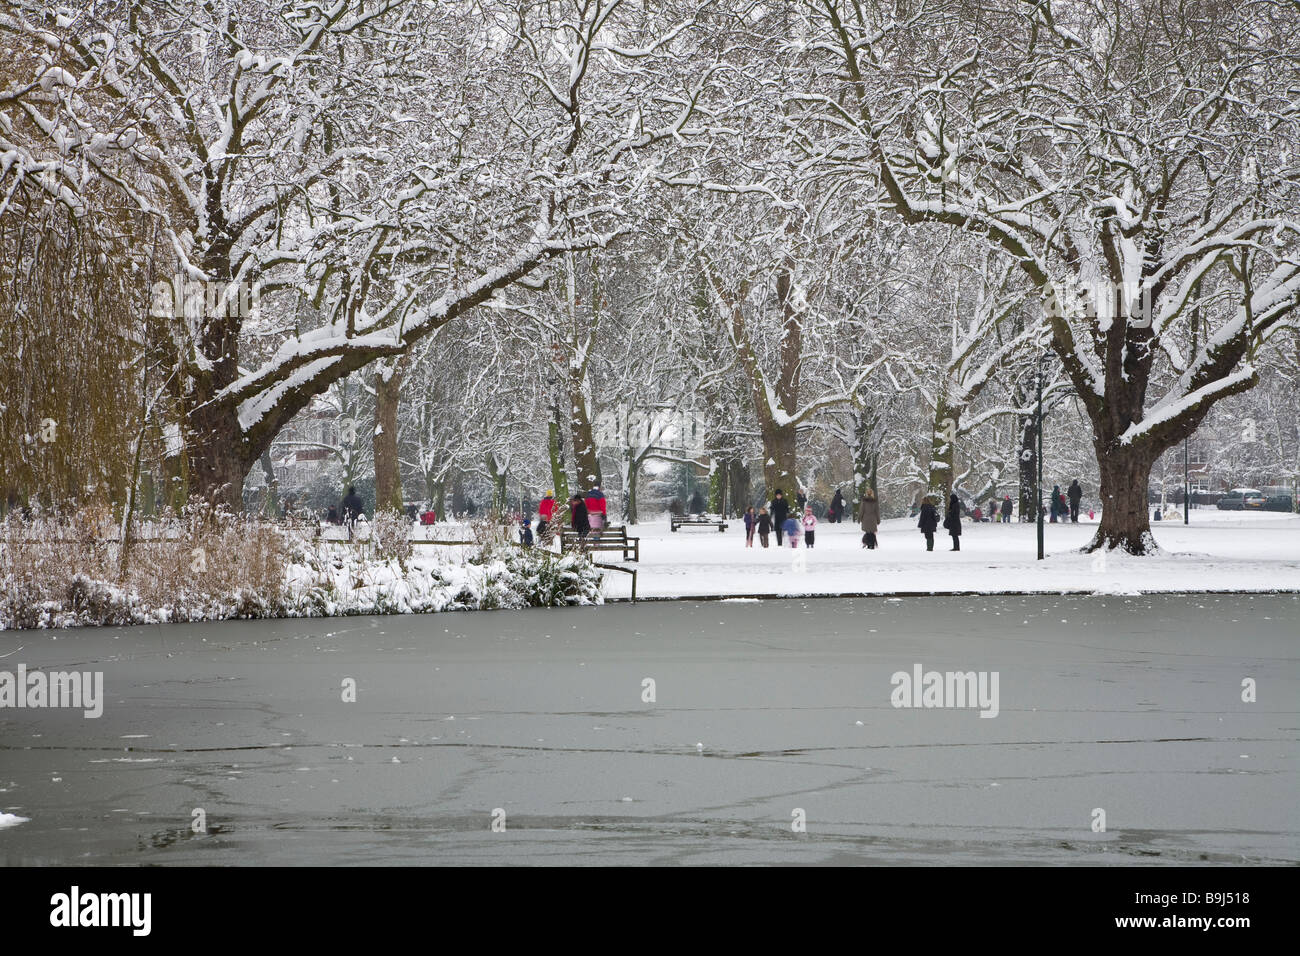 The frozen pond and snow-bound Green at Barnes, south west London, after a heavy snowfall in February 2009. Stock Photo